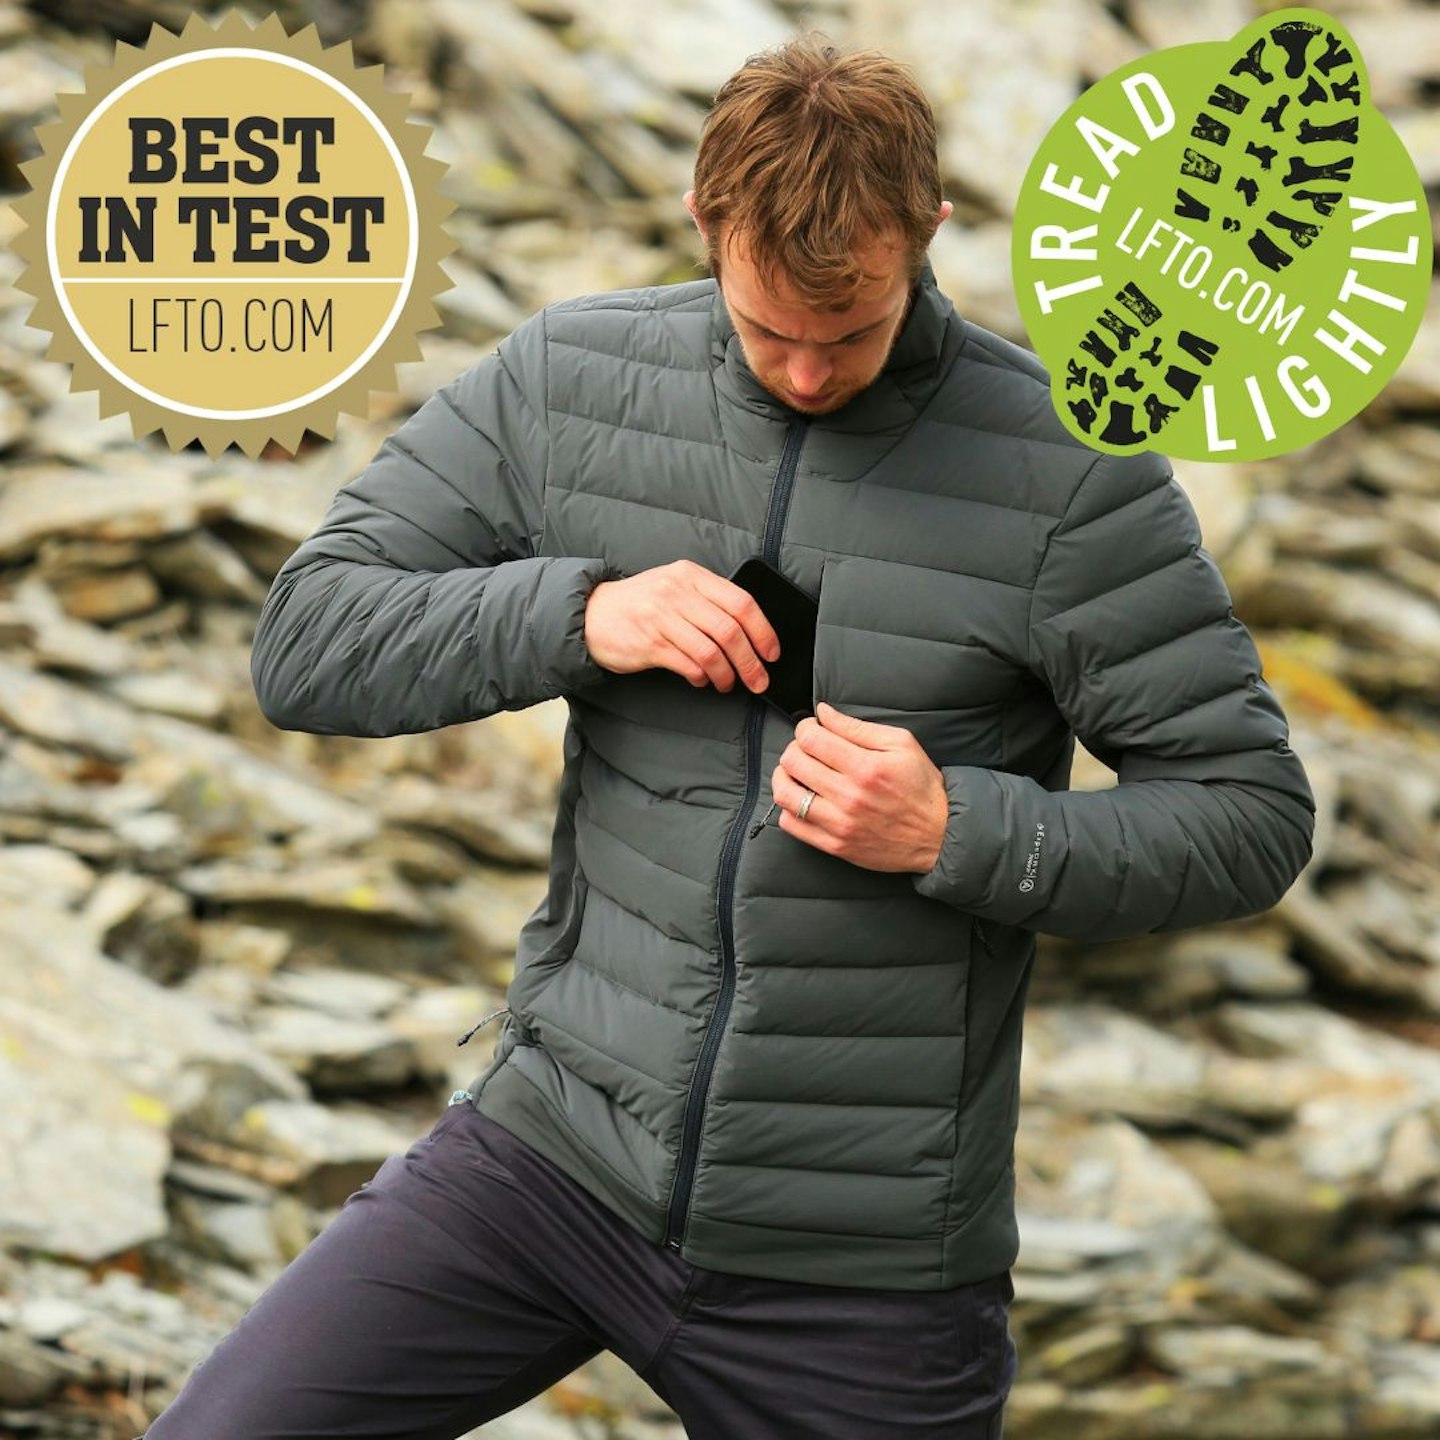 Artilect Divide Fusion Stretch Jacket being worn by a hiker